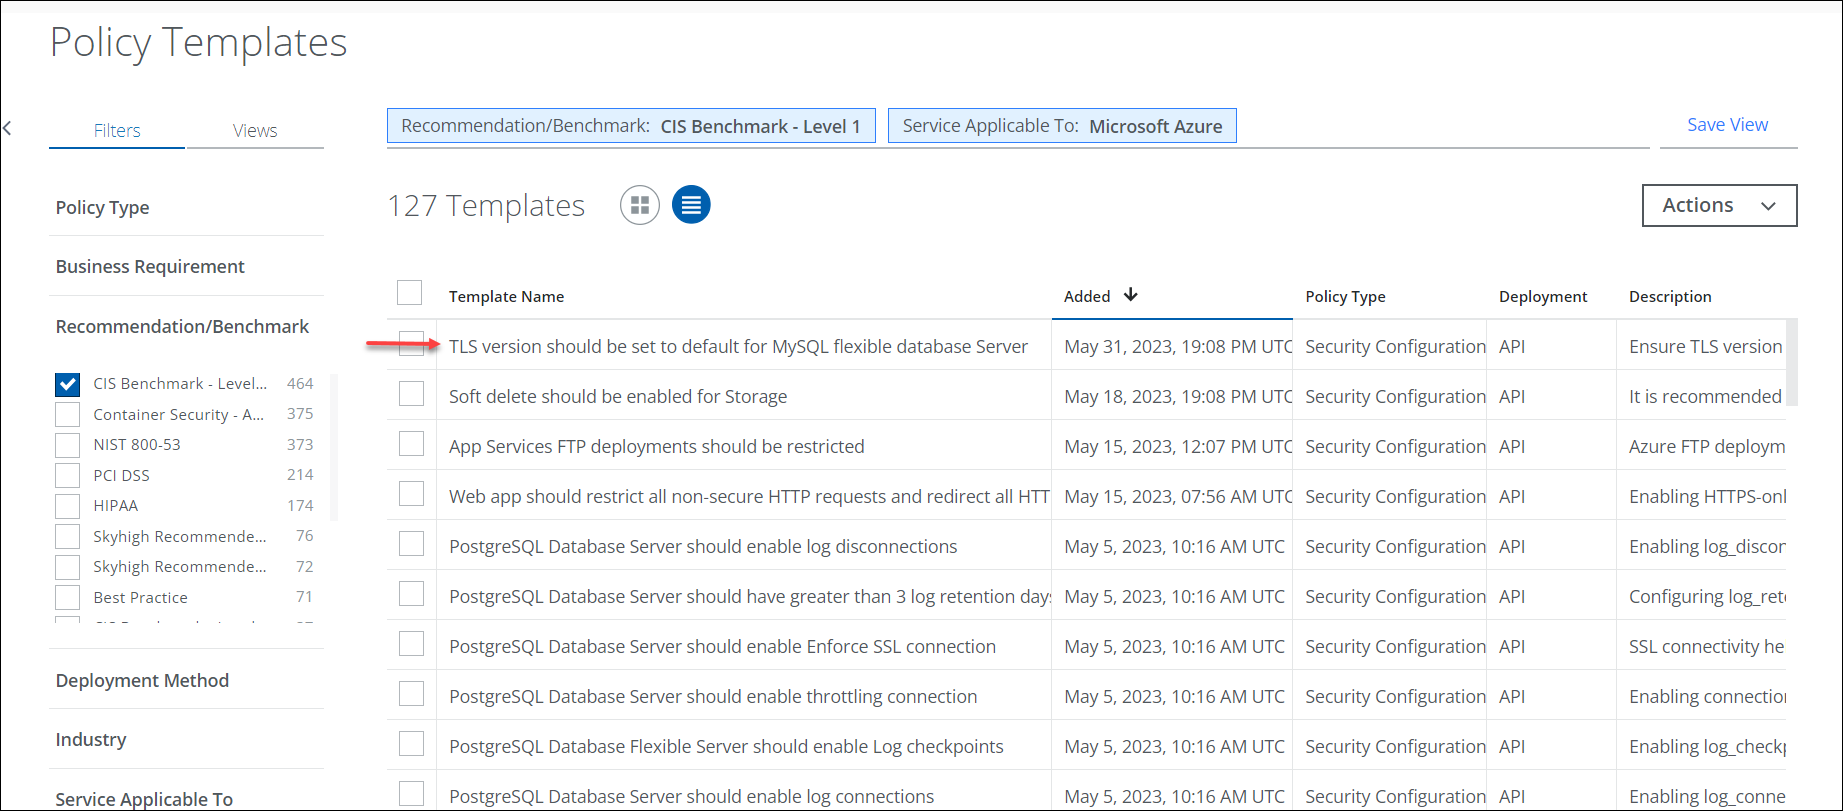 Azure_6.4.0_ New Template.png